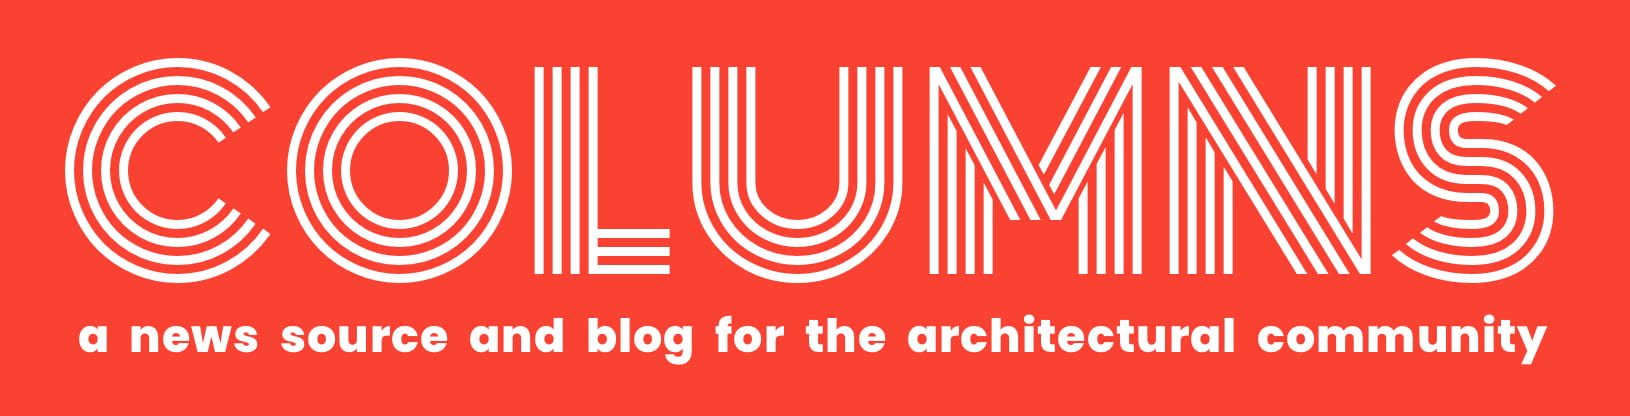 COLUMNS - A news source and blog for the architectural community.